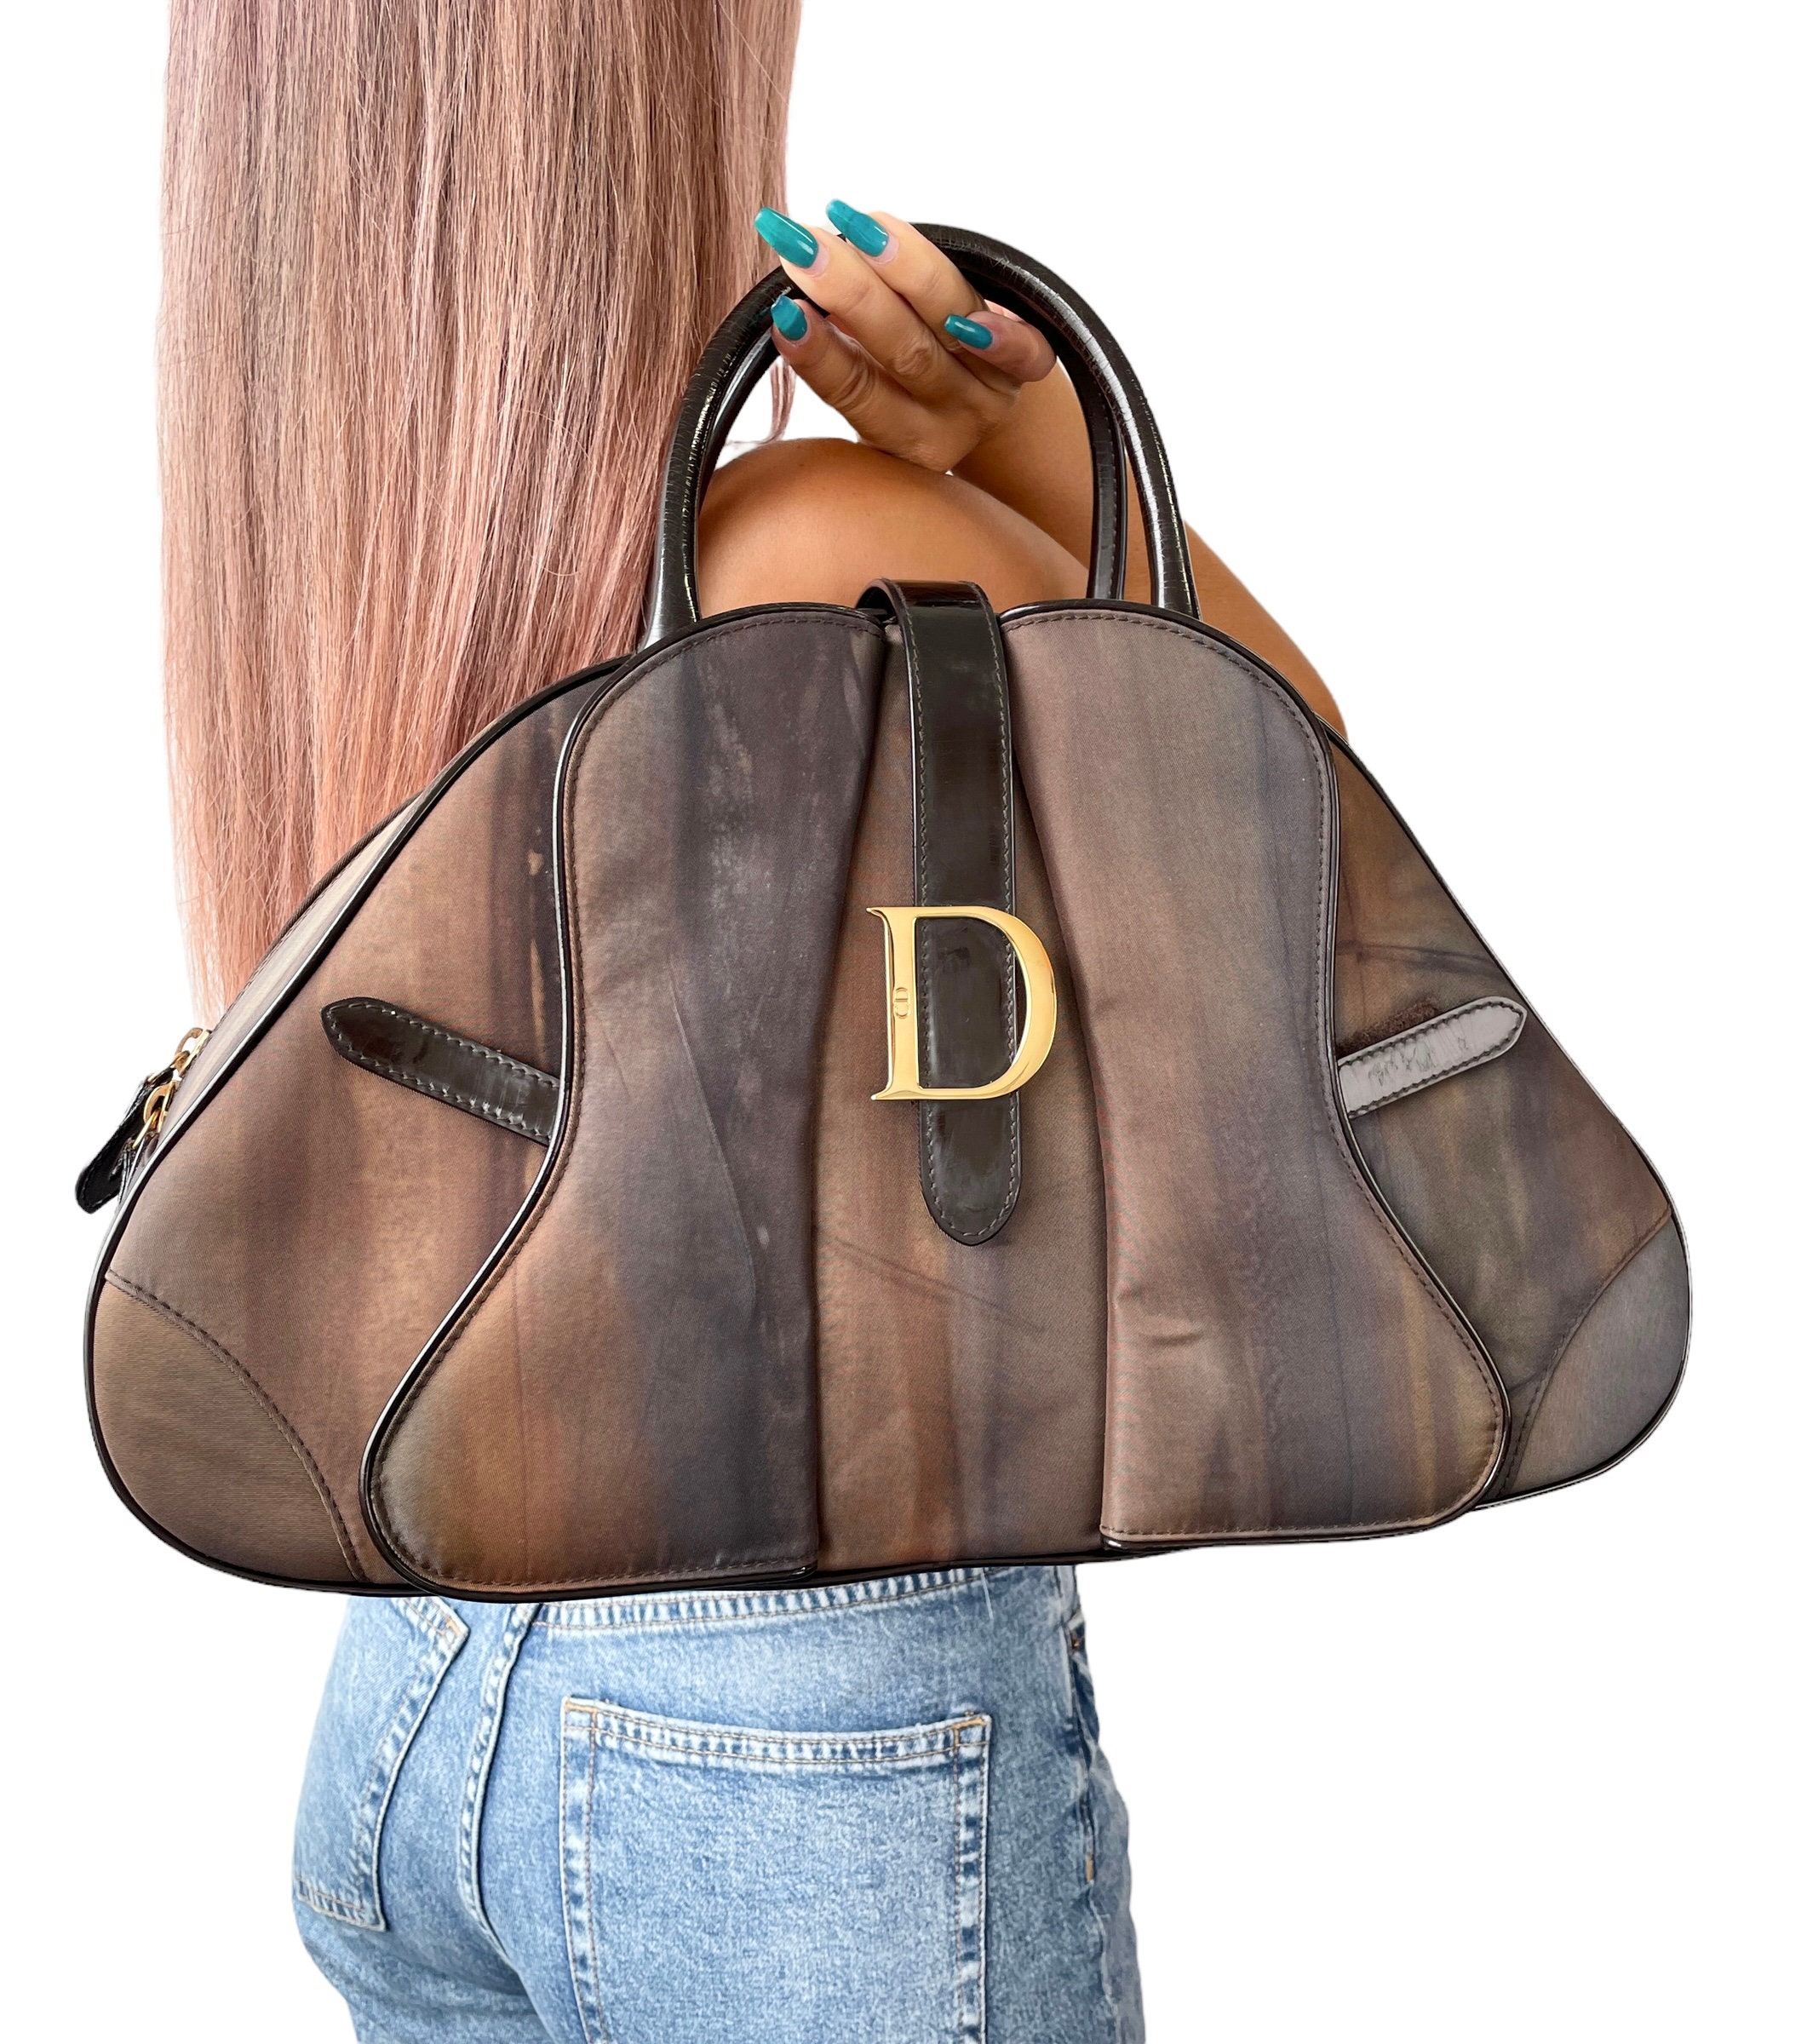 CHRISTIAN DIOR Denim Logo Double Saddle Bag with Pouch